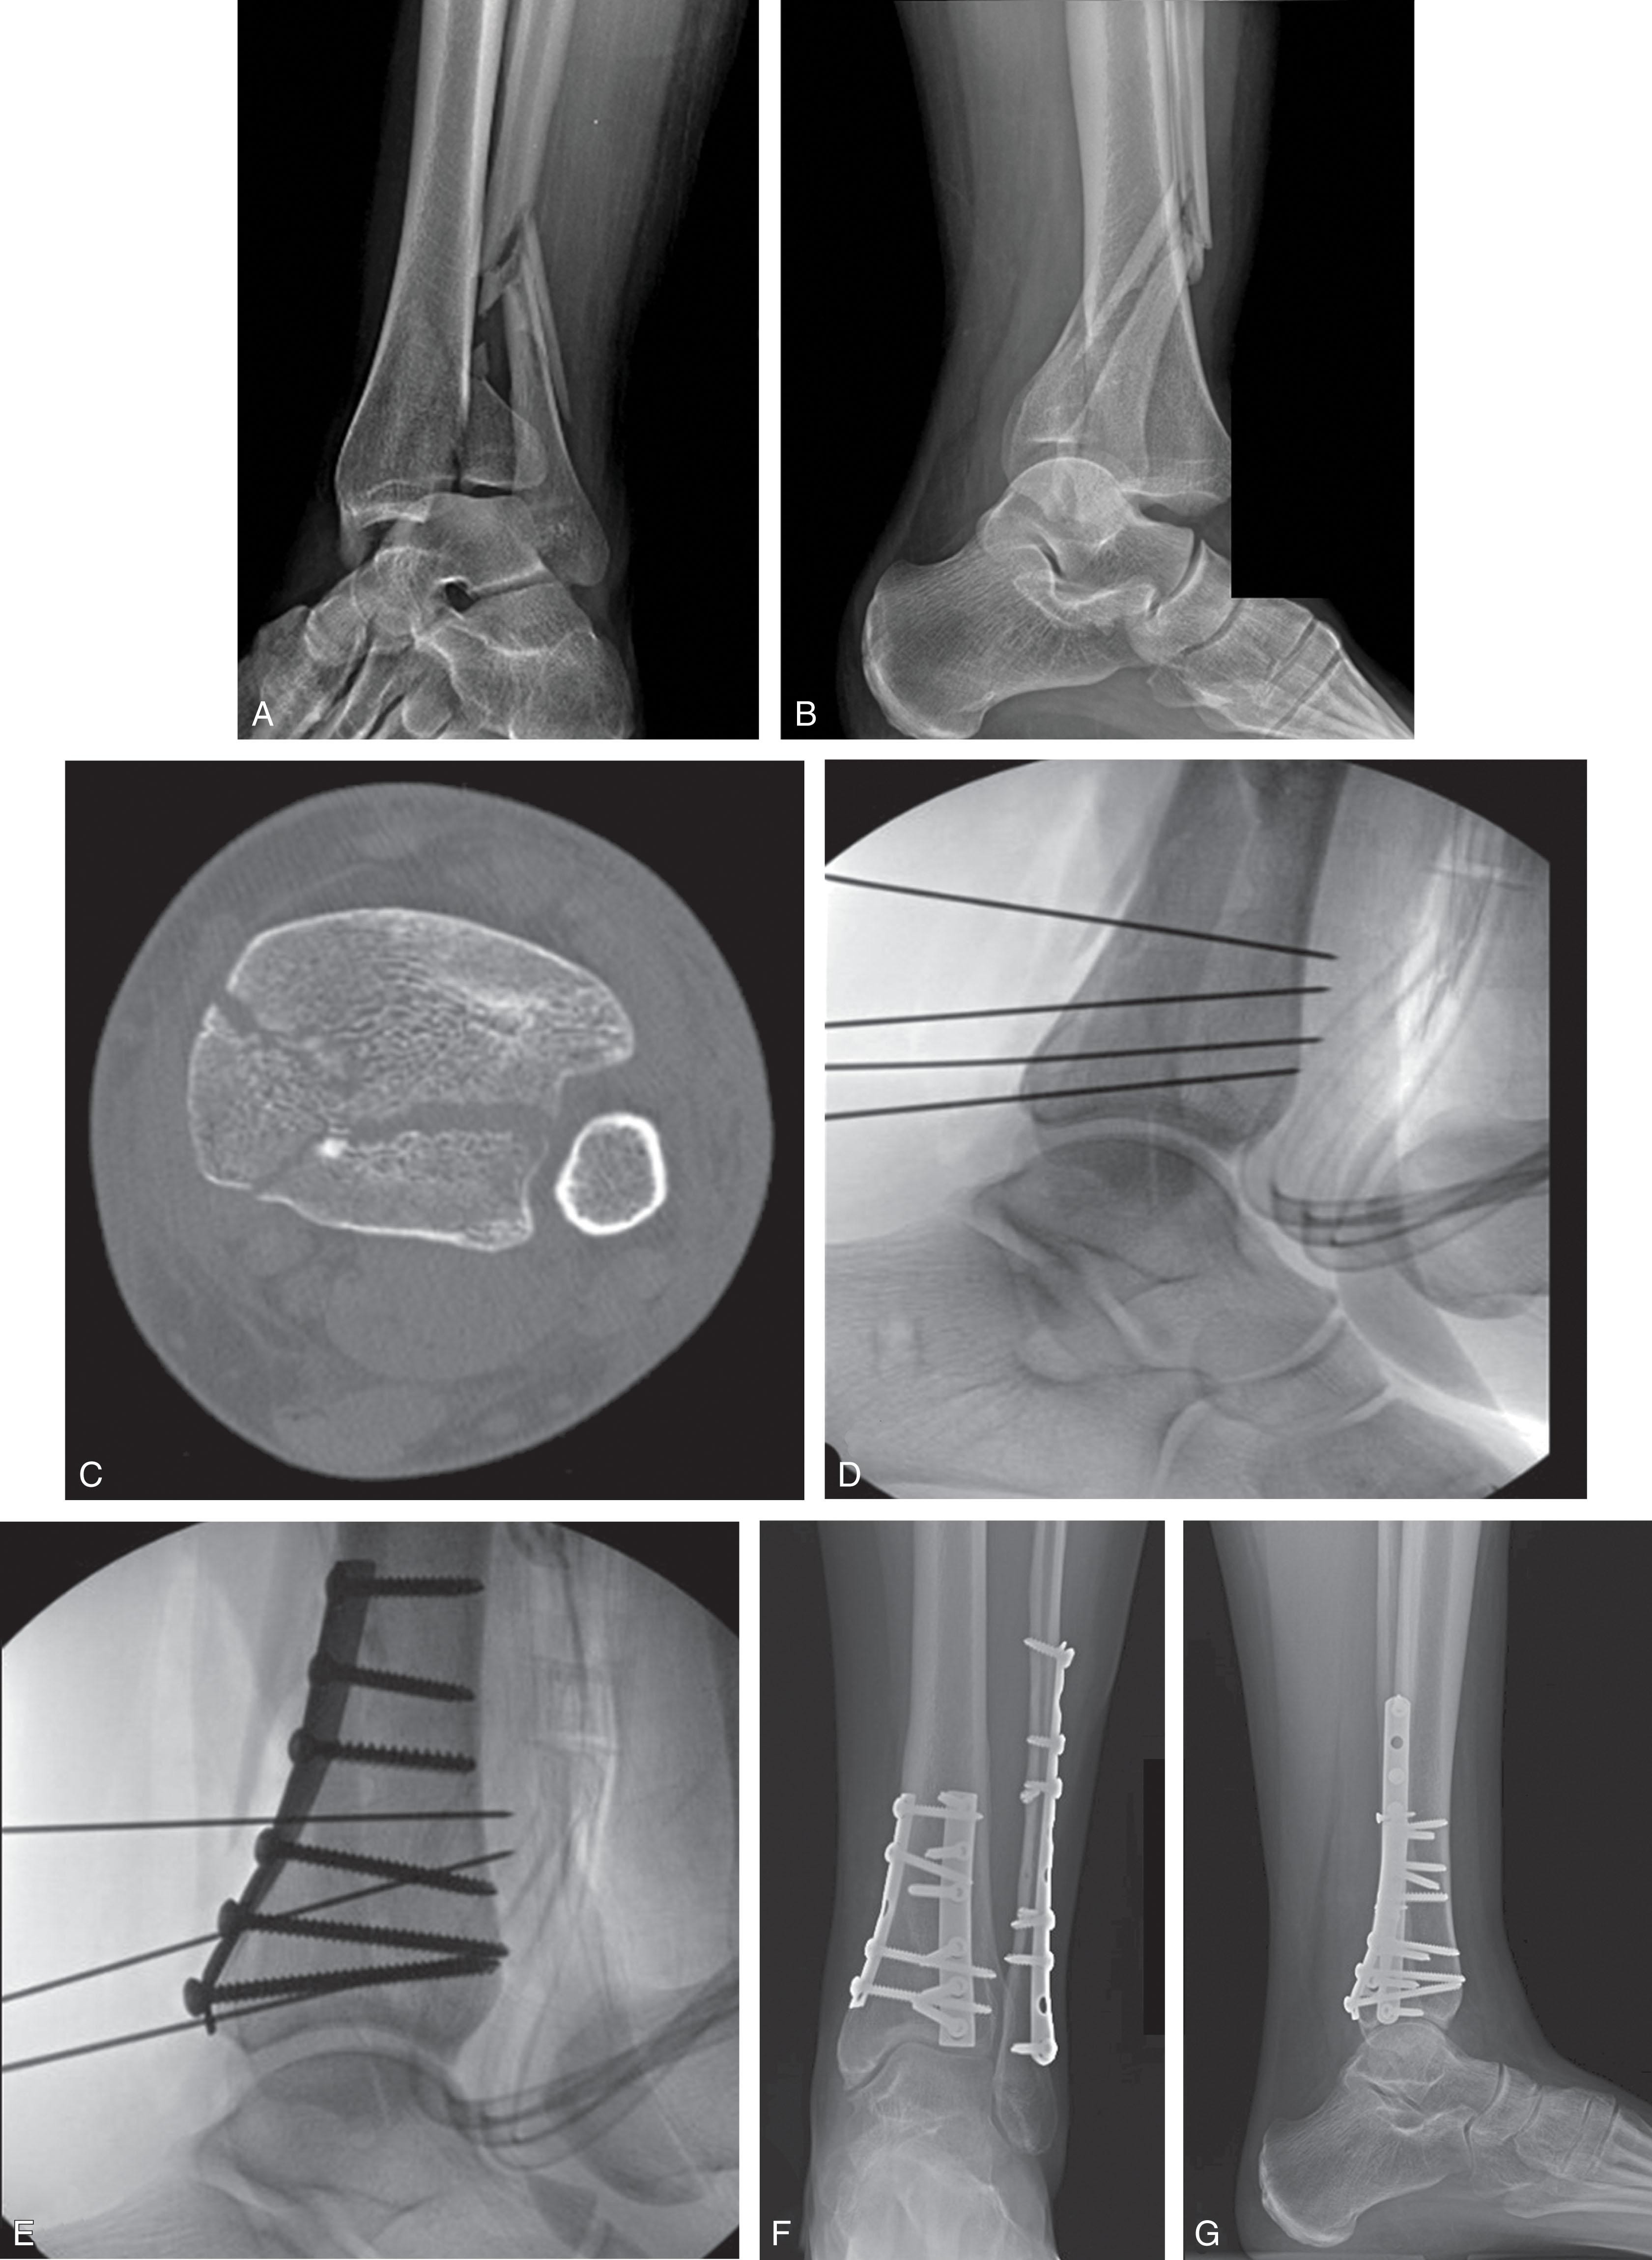 Fig. 43-14, A and B , Radiographs and C , CT scan of a posterior B-type pilon fracture with both posteromedial and posterolateral fragments. D and E , This is treated in prone position with combined posteromedial and posterolateral approaches. Two one-third tubular plates are placed over each fracture apex to act as a buttress against posterior displacement. F and G , Final radiographs after internal fixation.